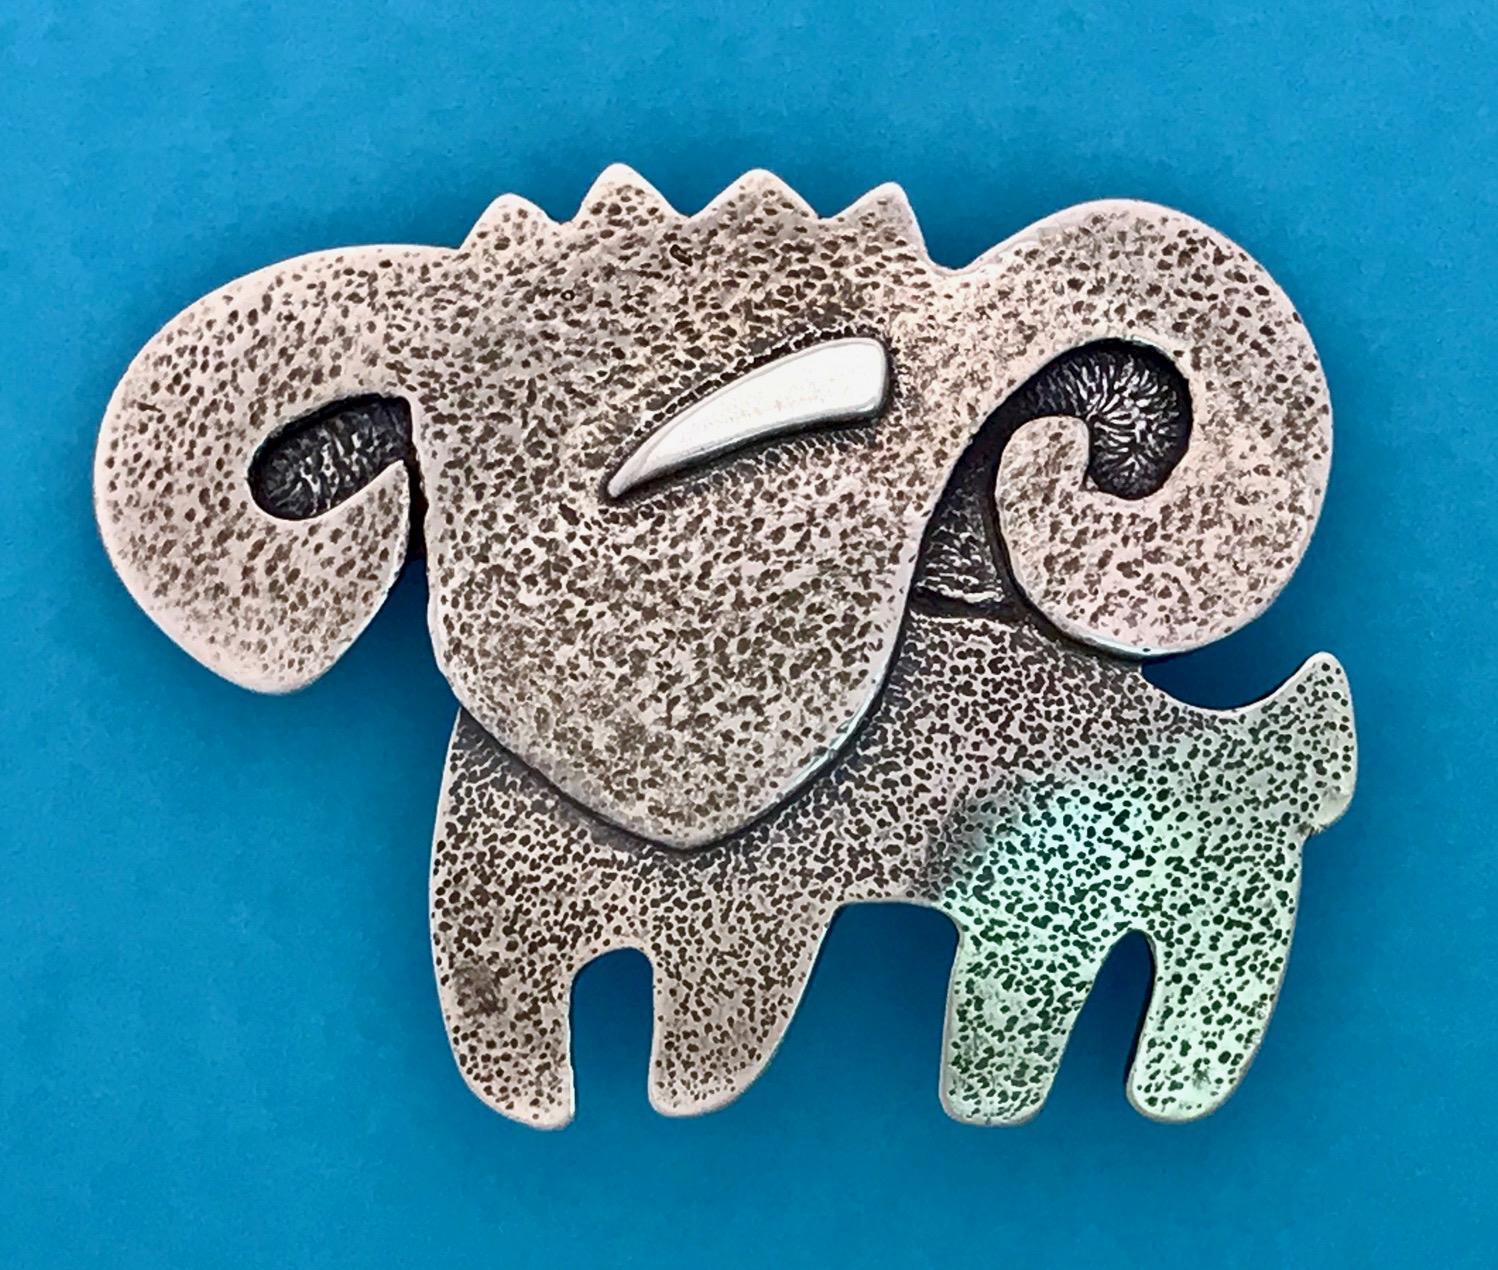 Patrick Joseph, Ram cast silver pendant Melanie Yazzie Navajo aries

Melanie A. Yazzie (Navajo-Diné) is a highly regarded multimedia artist known for her printmaking, paintings, sculpture, and jewelry designs.

She has exhibited, lectured, and